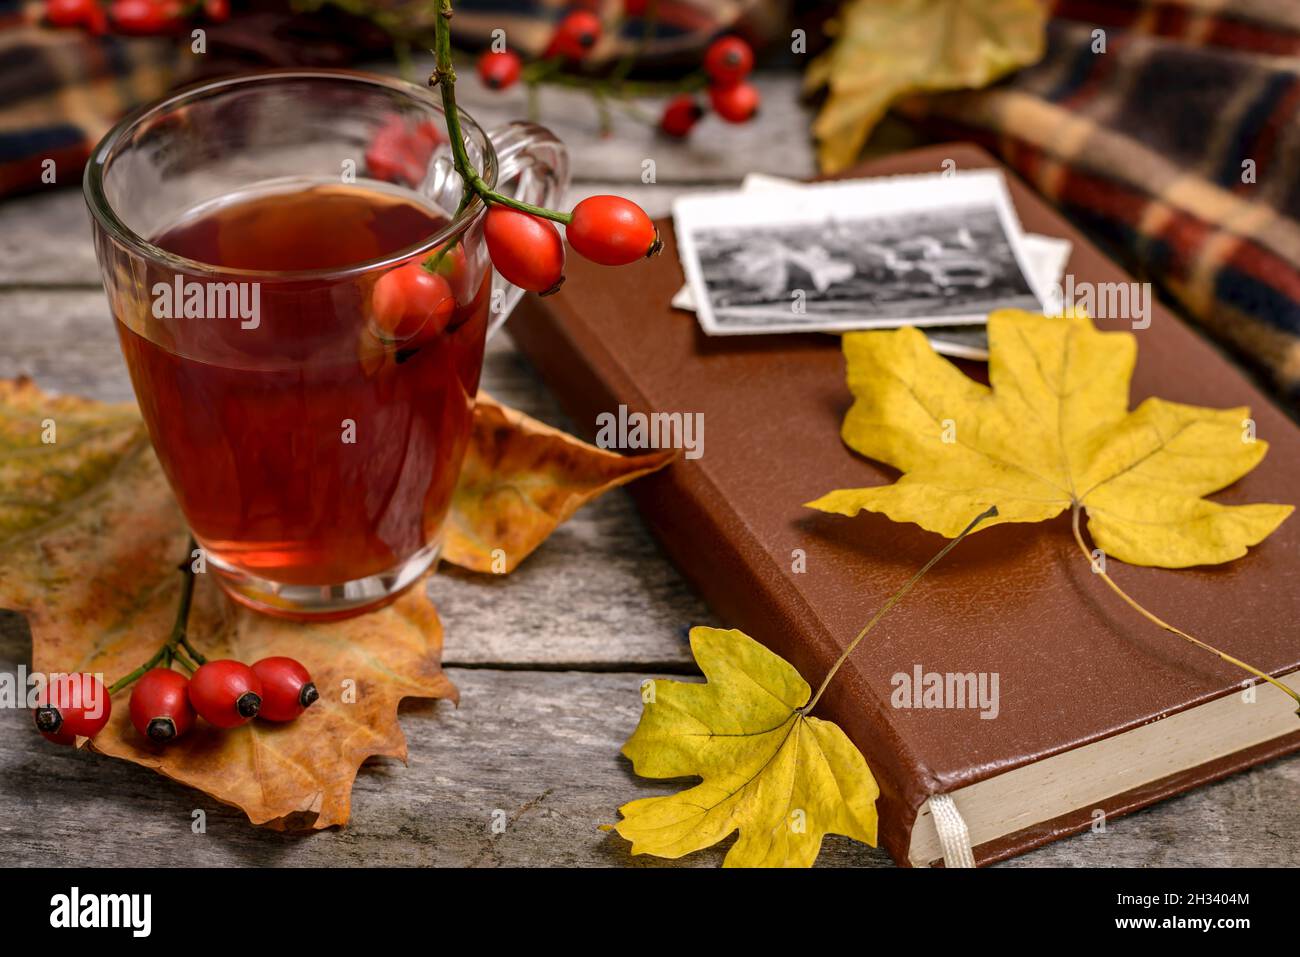 A cup of rose hip tea with fresh rose hips, old photographs, book and autumn leaves on wooden table. Autumn concept, selective focus. Stock Photo